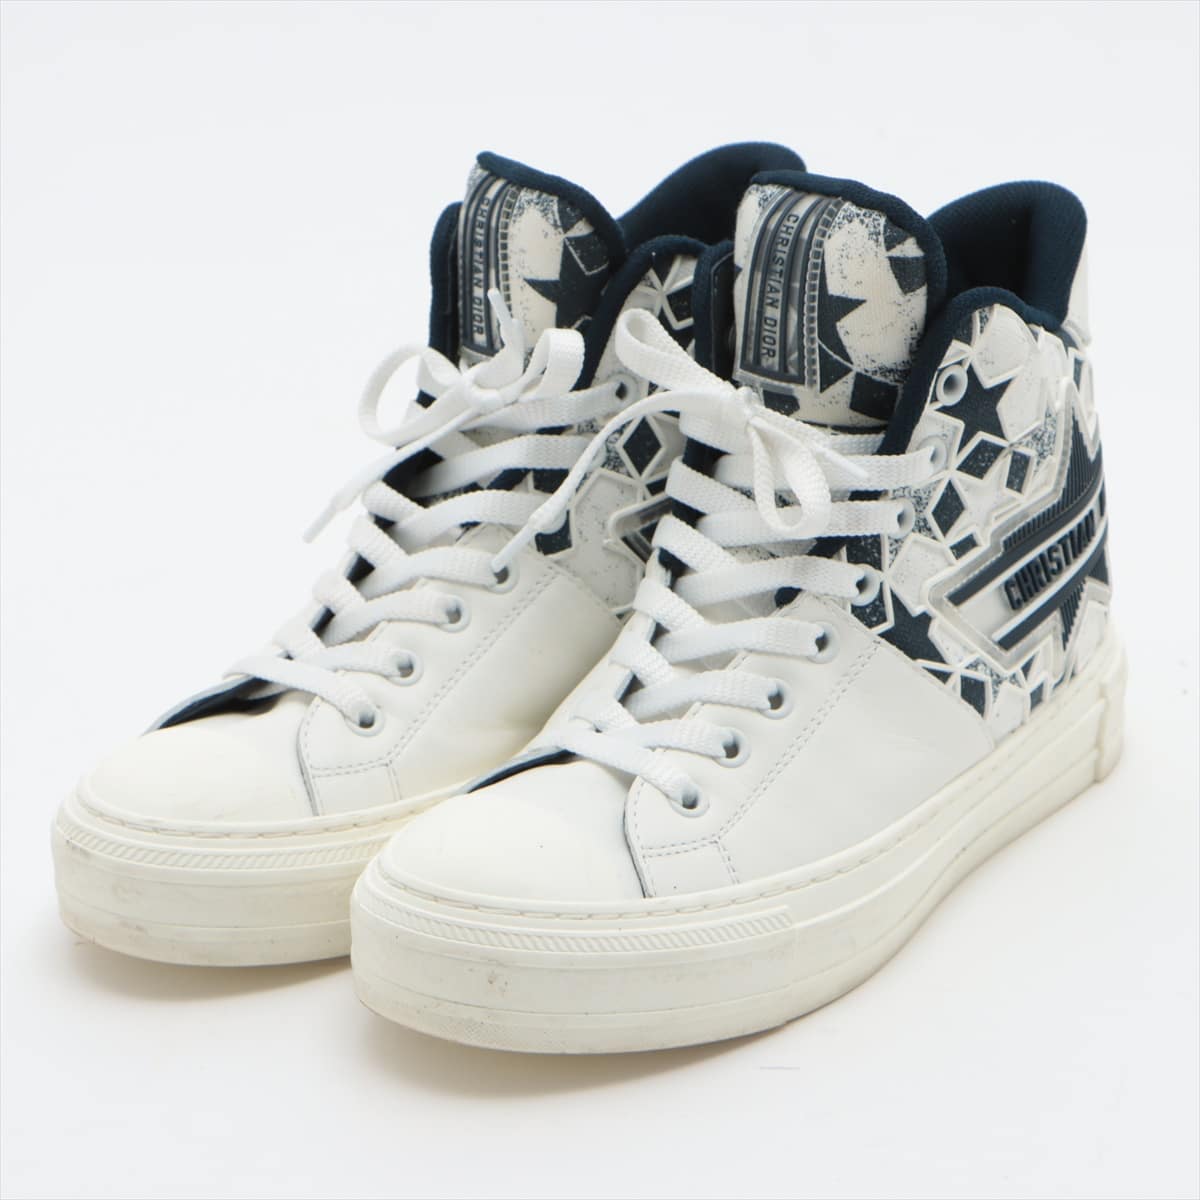 Christian Dior 22SS Leather High-top Sneakers 36 Ladies' White x navy Walk'n'Dior Star DC0921 DIOR Etoile